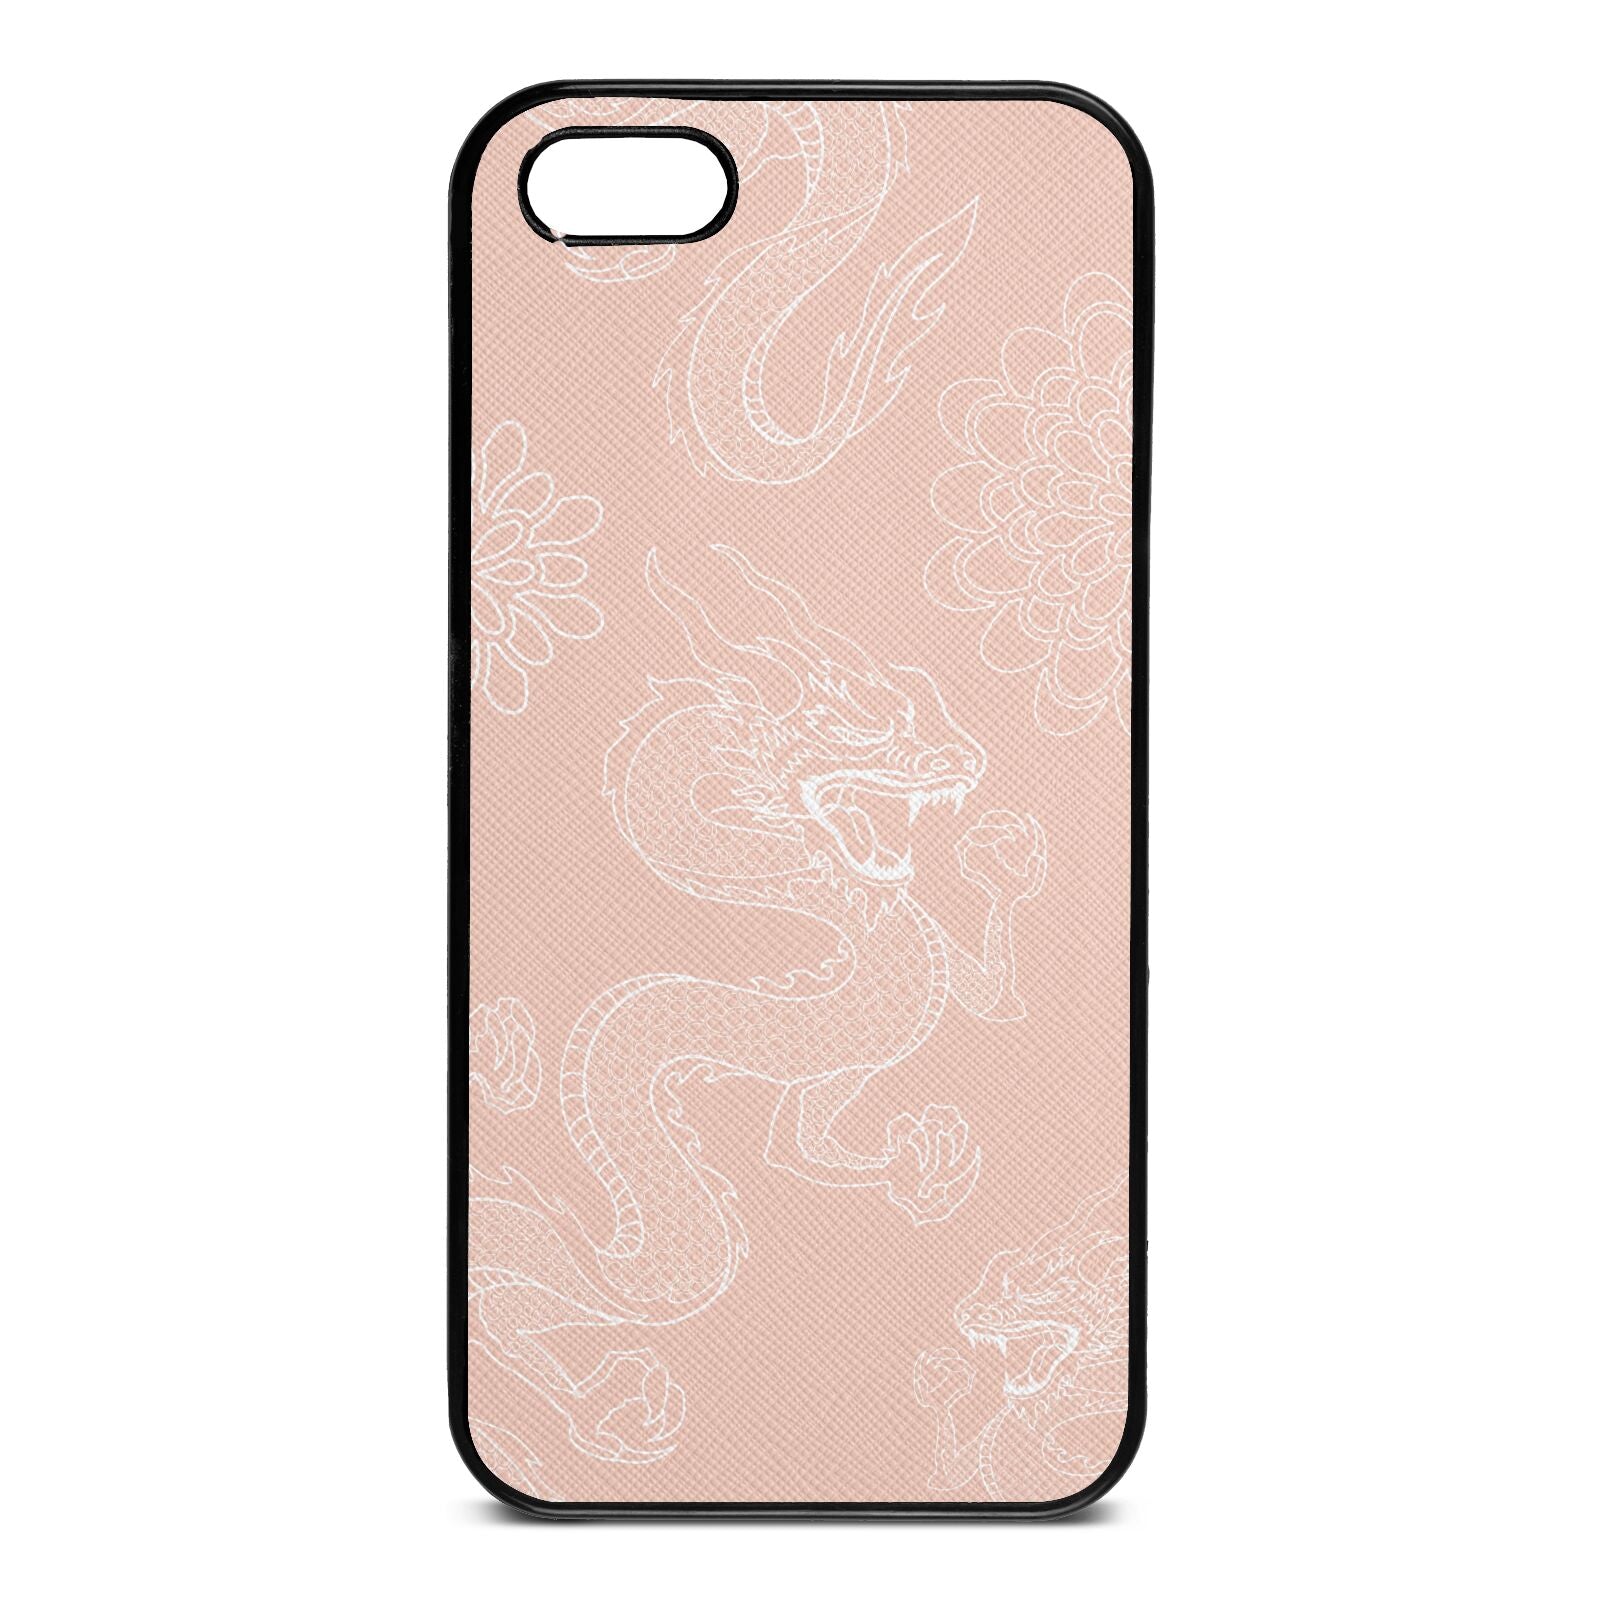 Dragons Nude Saffiano Leather iPhone 5 Case